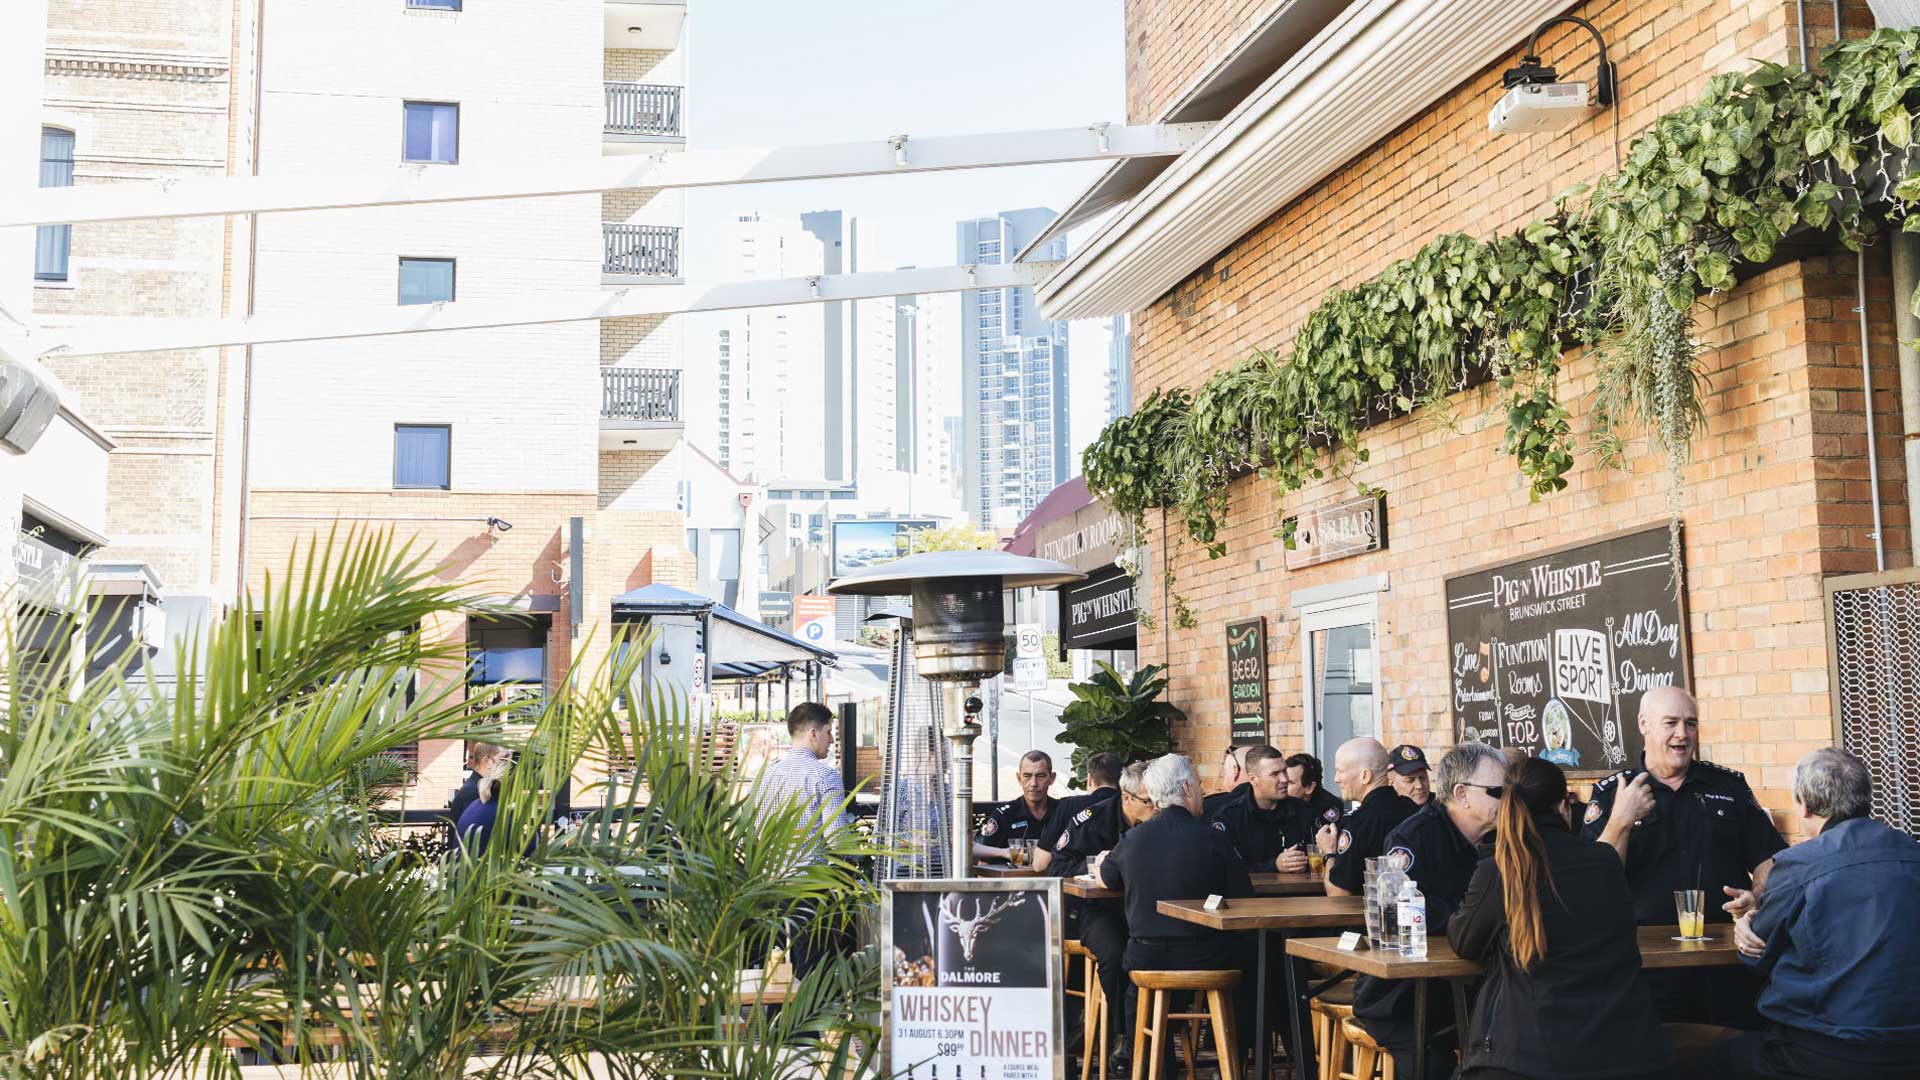 Queensland's Restaurants, Cafes and Bars Might Be Able to Reopen in June